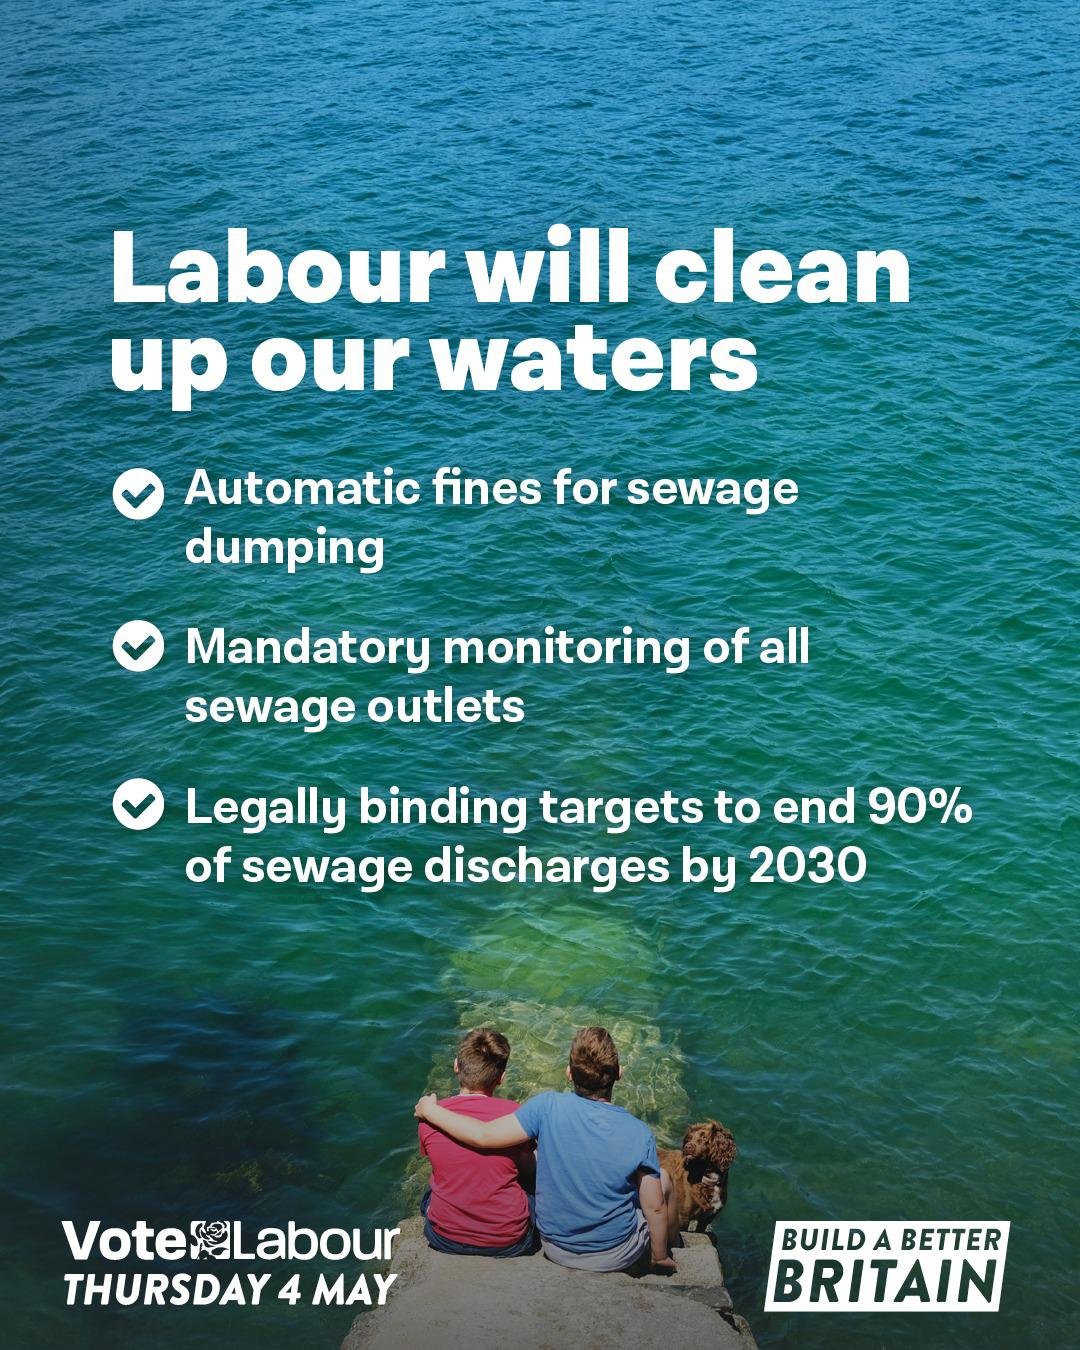 Tories continue to back dumping sewage